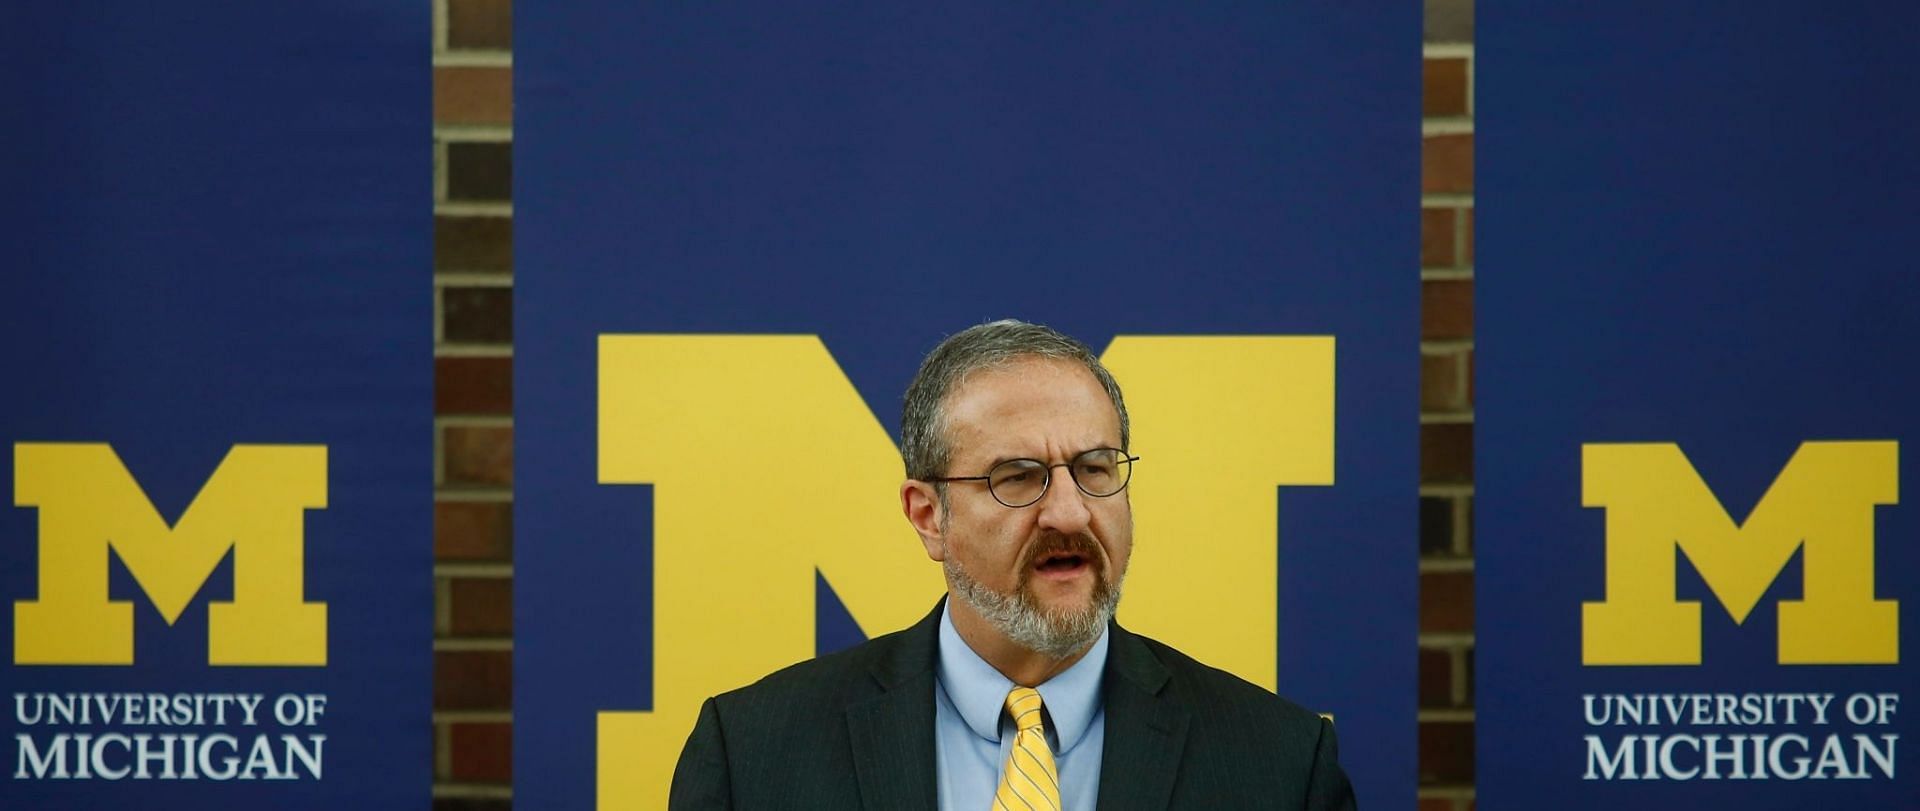 University of Michigan President Mark Schlissel has been fired for having an affair with a subordinate (Image via Joshua Lott/Getty Images)